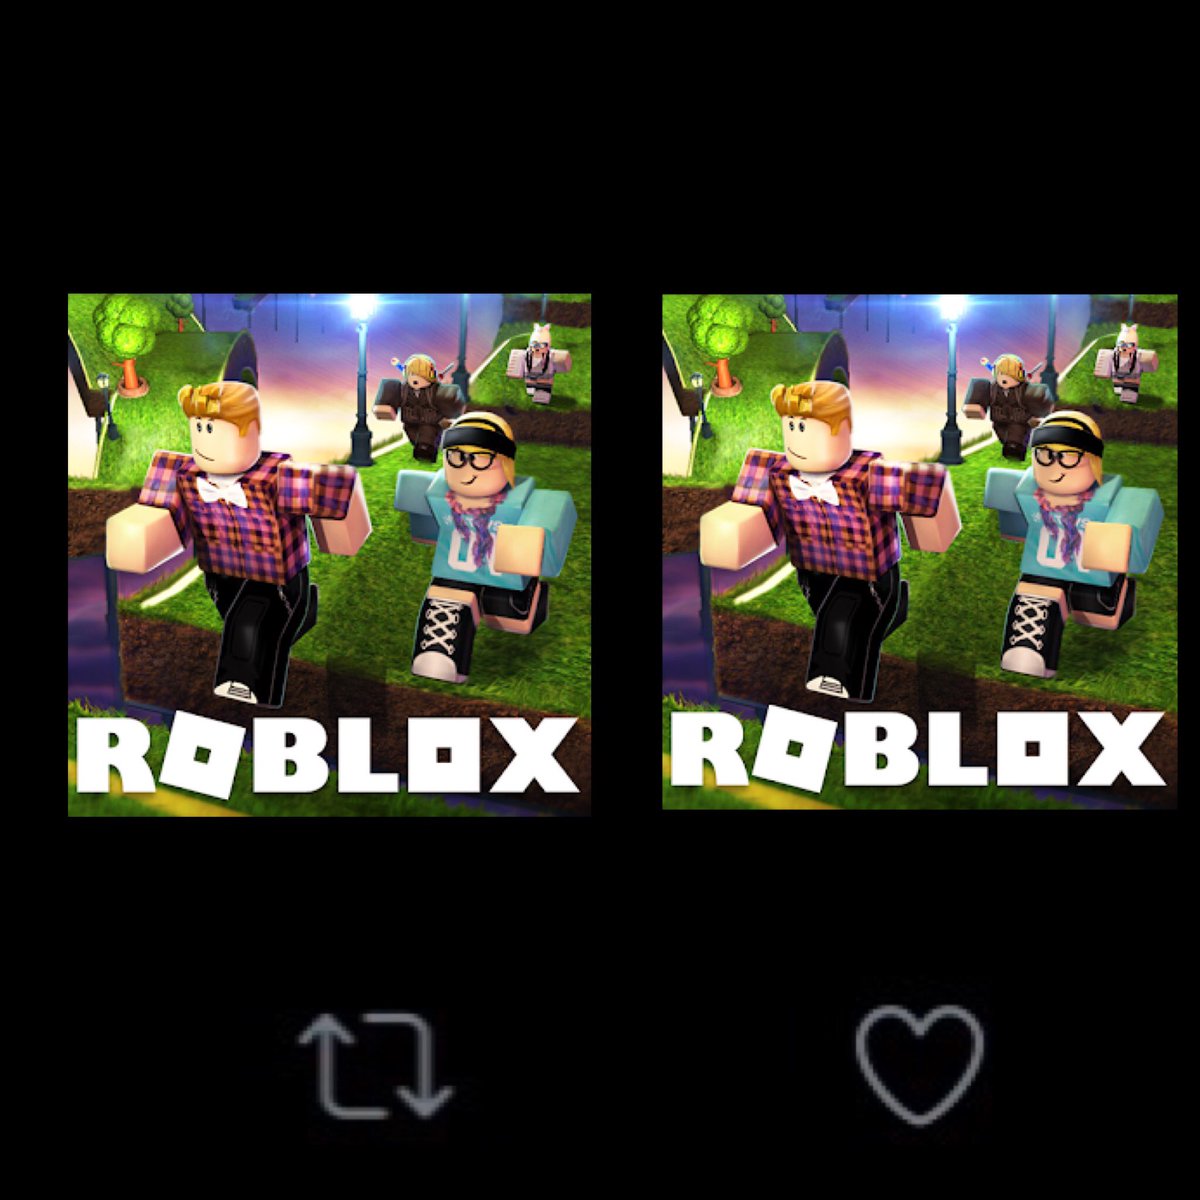 Furry On Twitter Retweet For Roblox Like For Roblox Honestly I Can T Decide Because Both Are Pretty Good Not Gonna Lie - this is what happens when you lie on roblox roblox